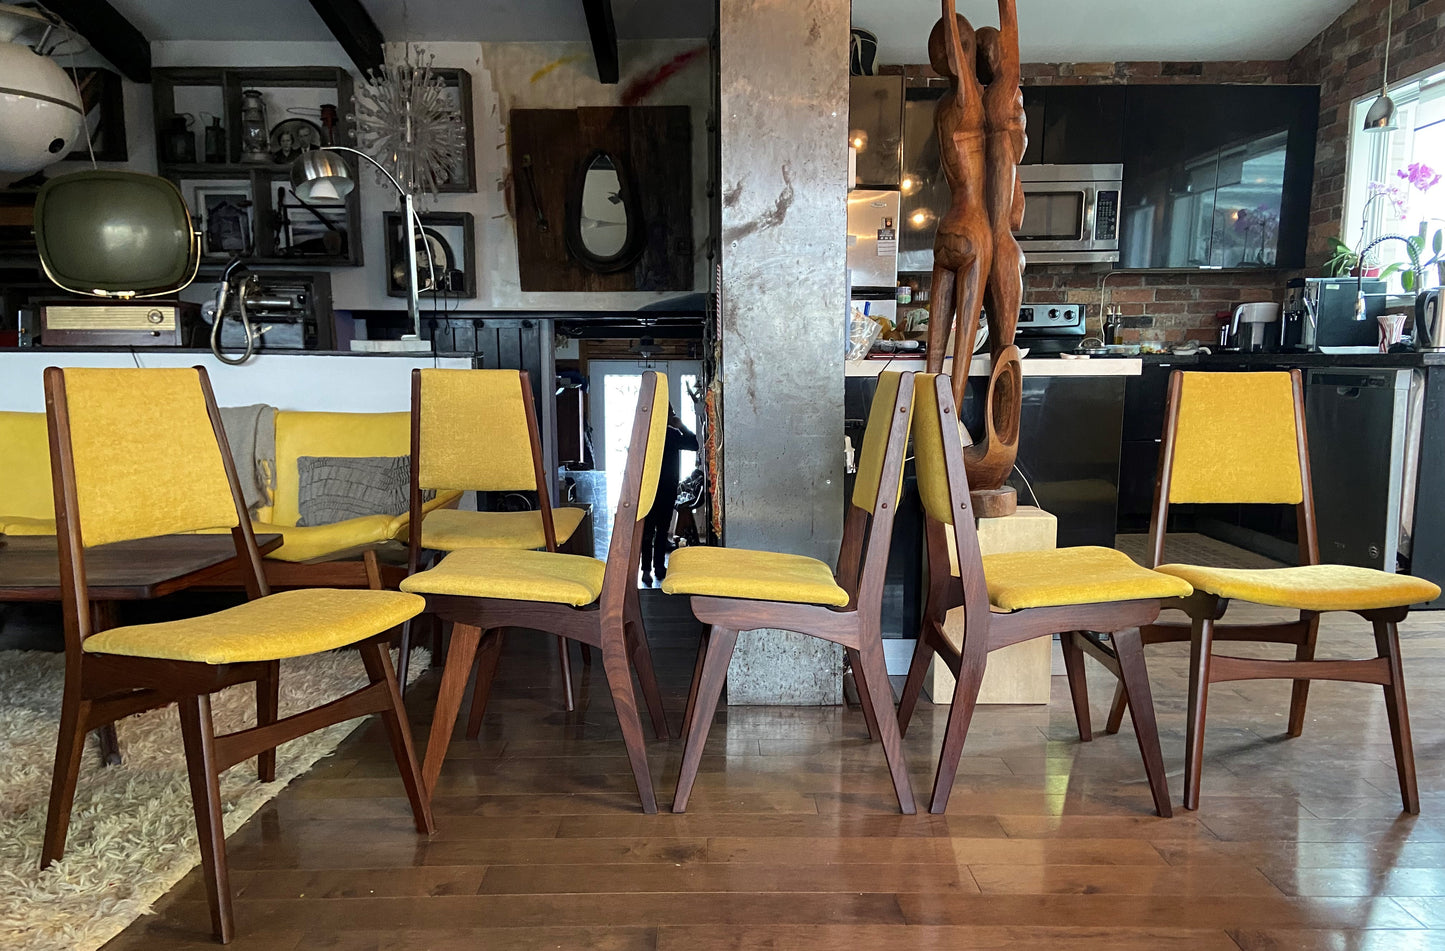 6 REFINISHED Mid Century Modern Teak Chairs REUPHOLSTERED